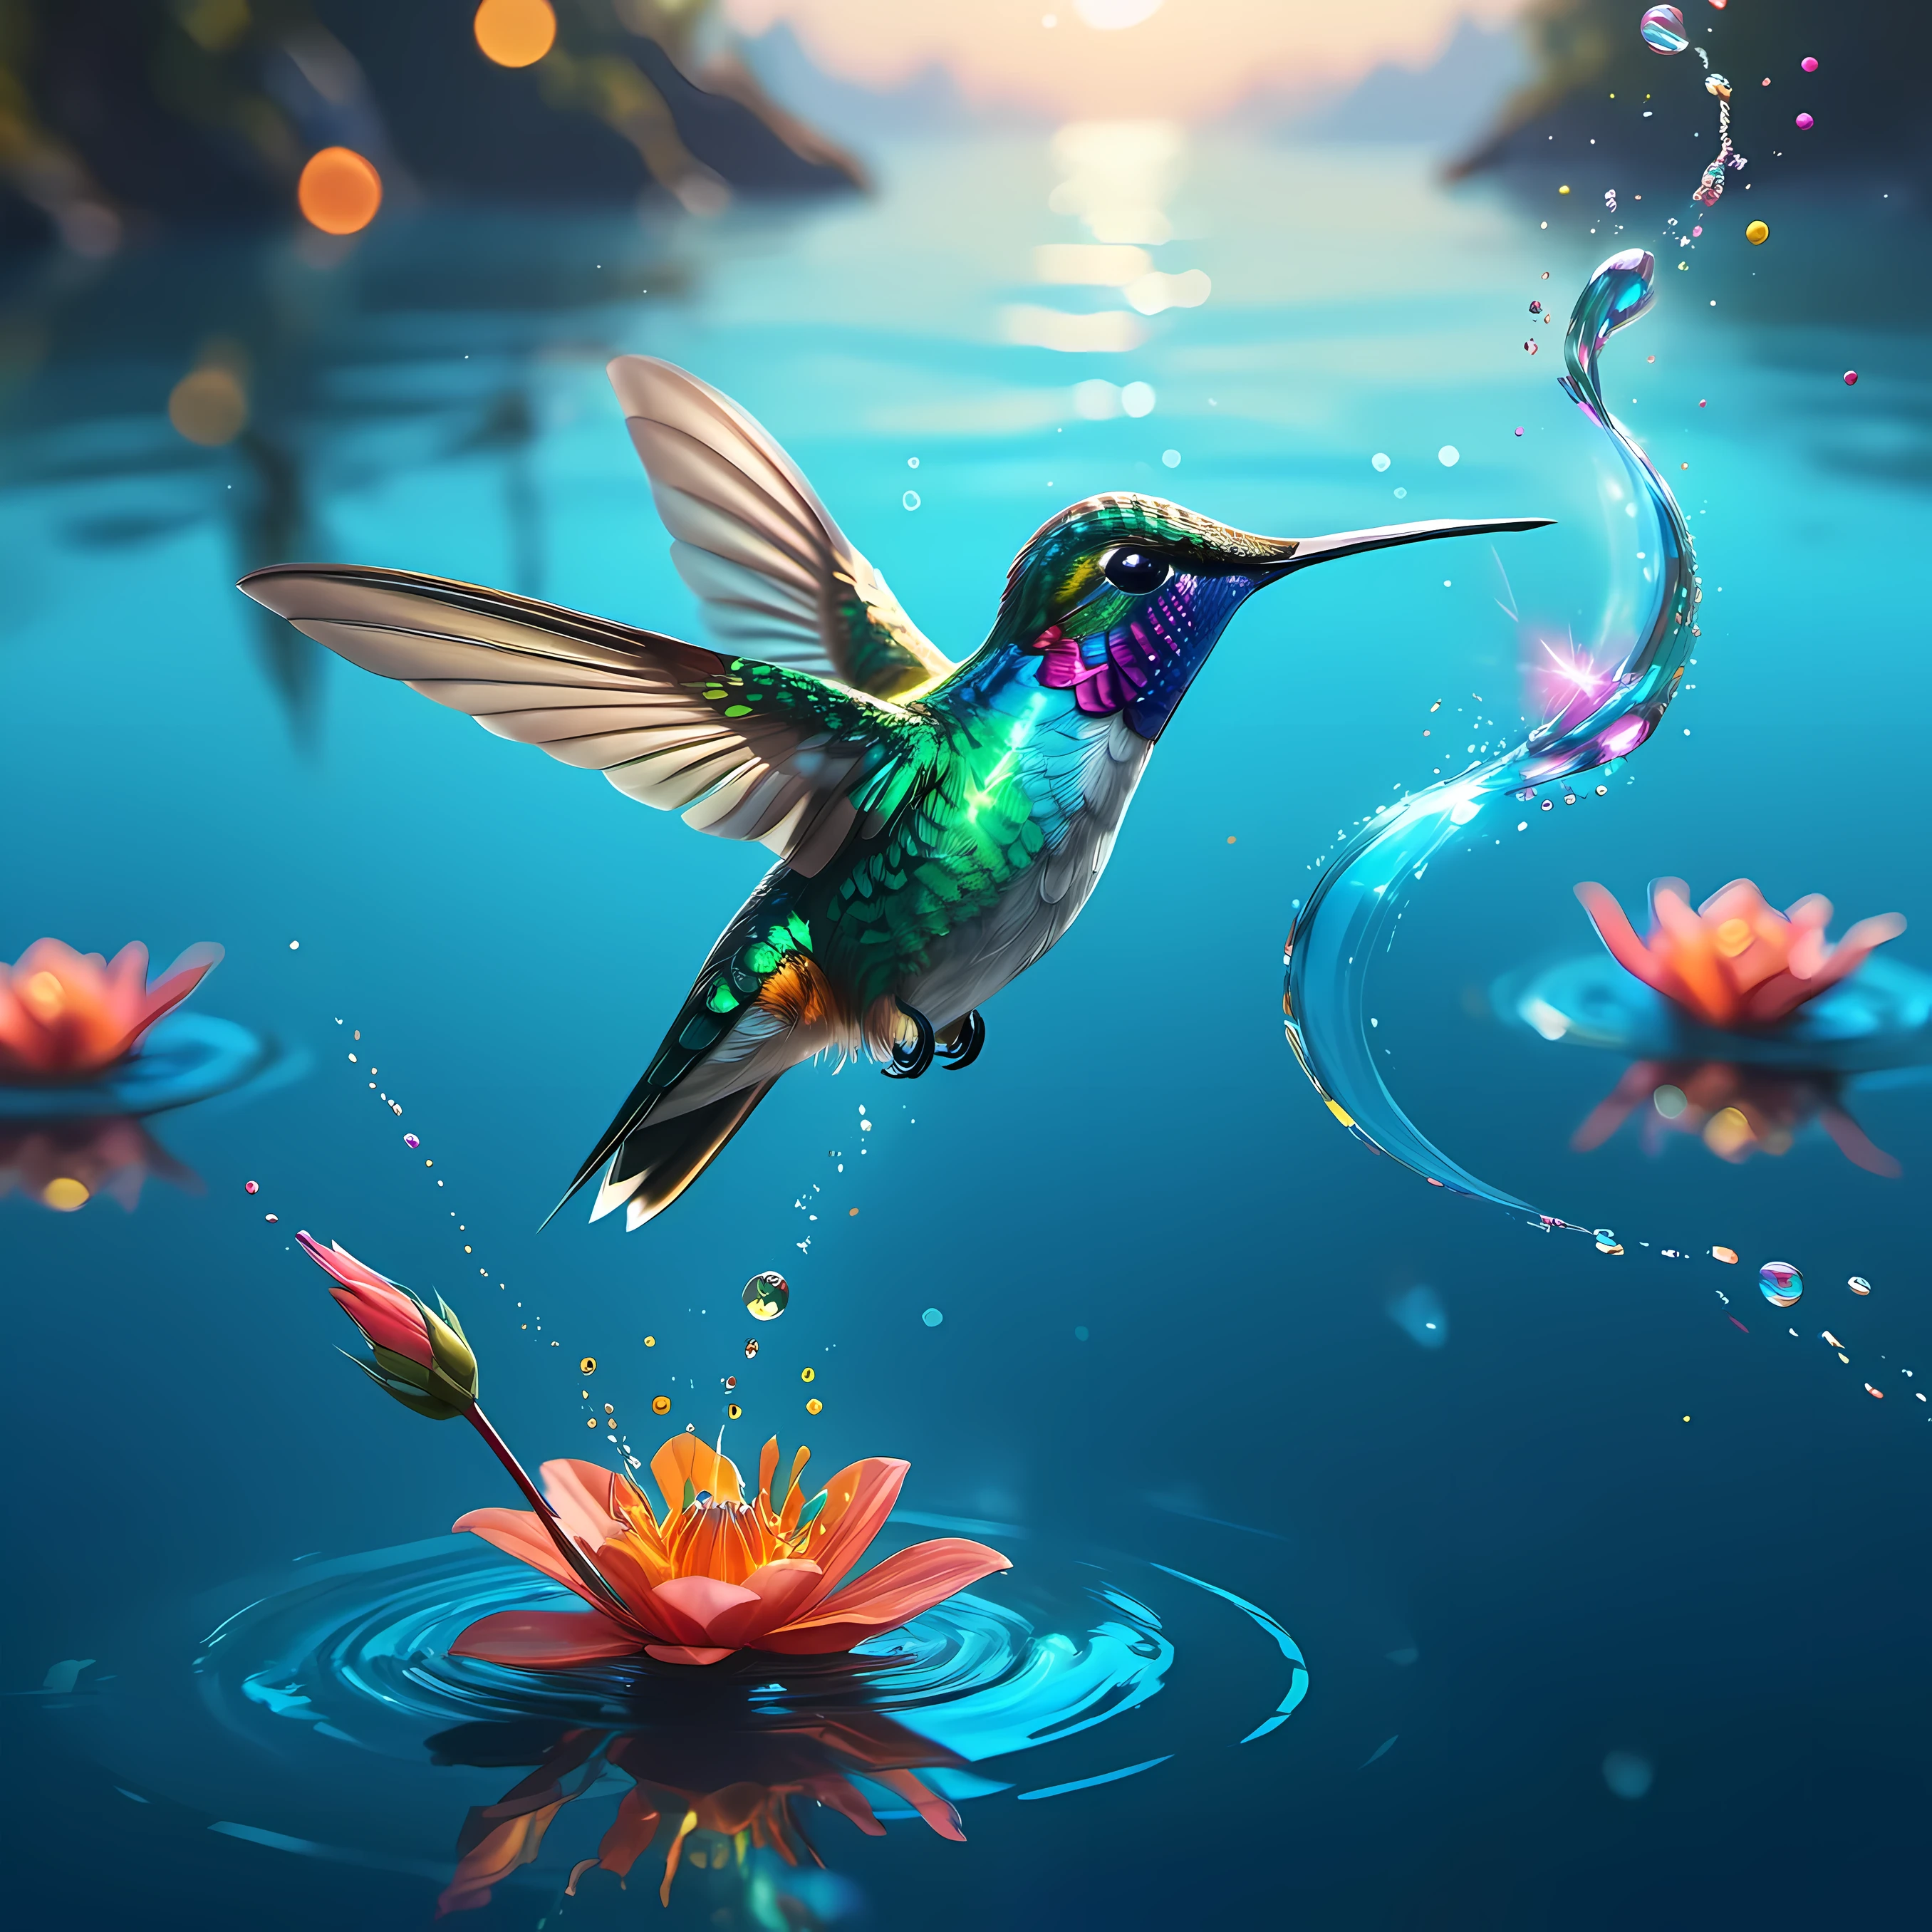 Ultra-detailed 4K digital artwork captures the mesmerizing flight of a hummingbird over tranquil blue water, reminiscent of mike winkelmann (Mike Winkelmann) lifelike paintings created (hummingbird) Similar to the vividness of award-winning nature photography. The scene depicts the bird gliding gracefully over the water, Its entire body glows with iridescence, especially its eyes, sparkle like two radiant gems. This epic concept art showcases dynamic bokeh effects, Highlight the mastery of digital painting technology, Similar to Shutterstock Contest Approved Masterpieces.

